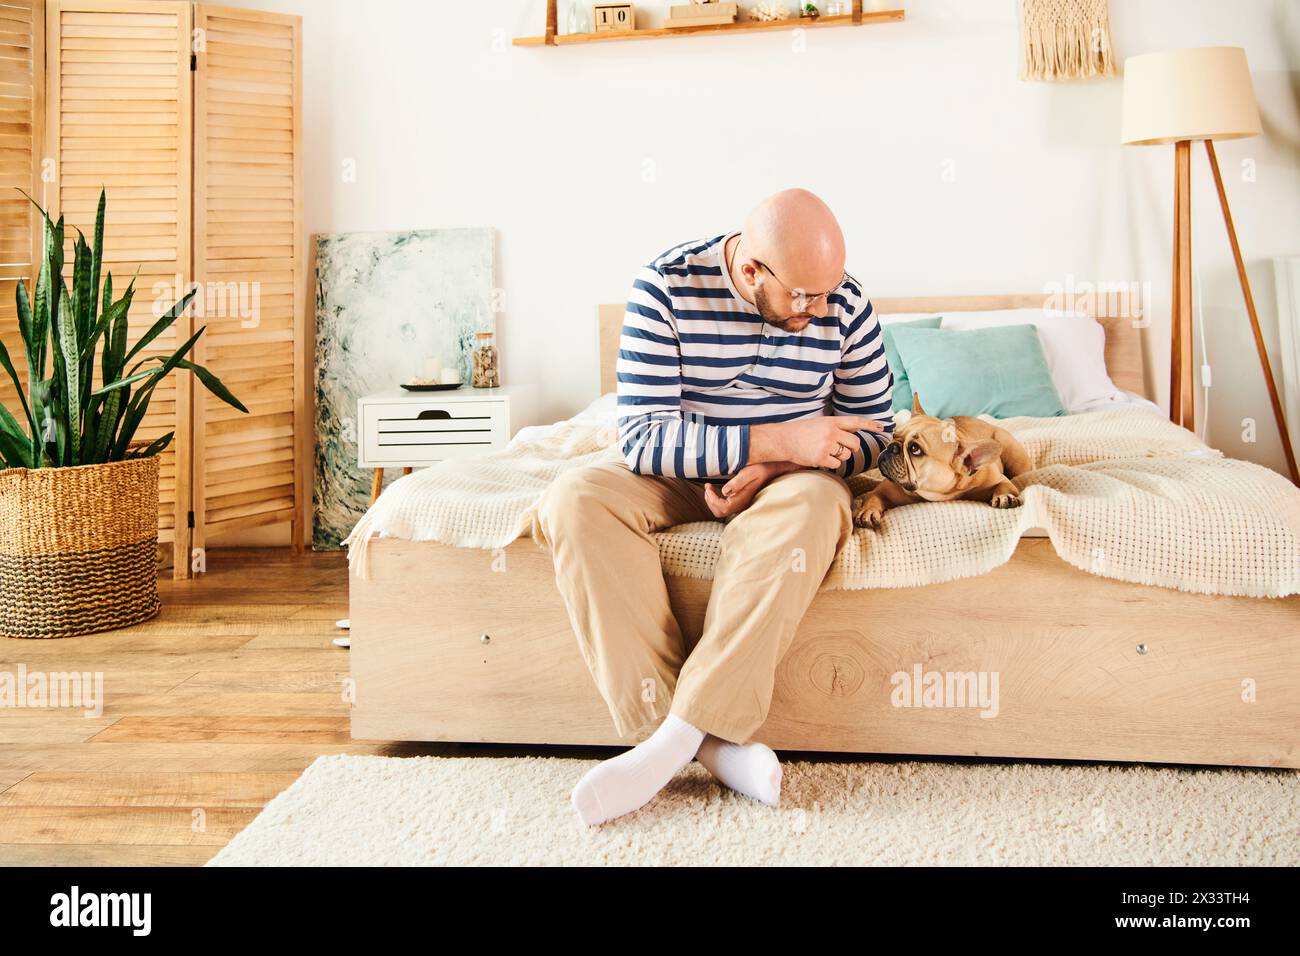 Handsome man sitting on bed, relaxing with loyal French Bulldog. Stock Photo